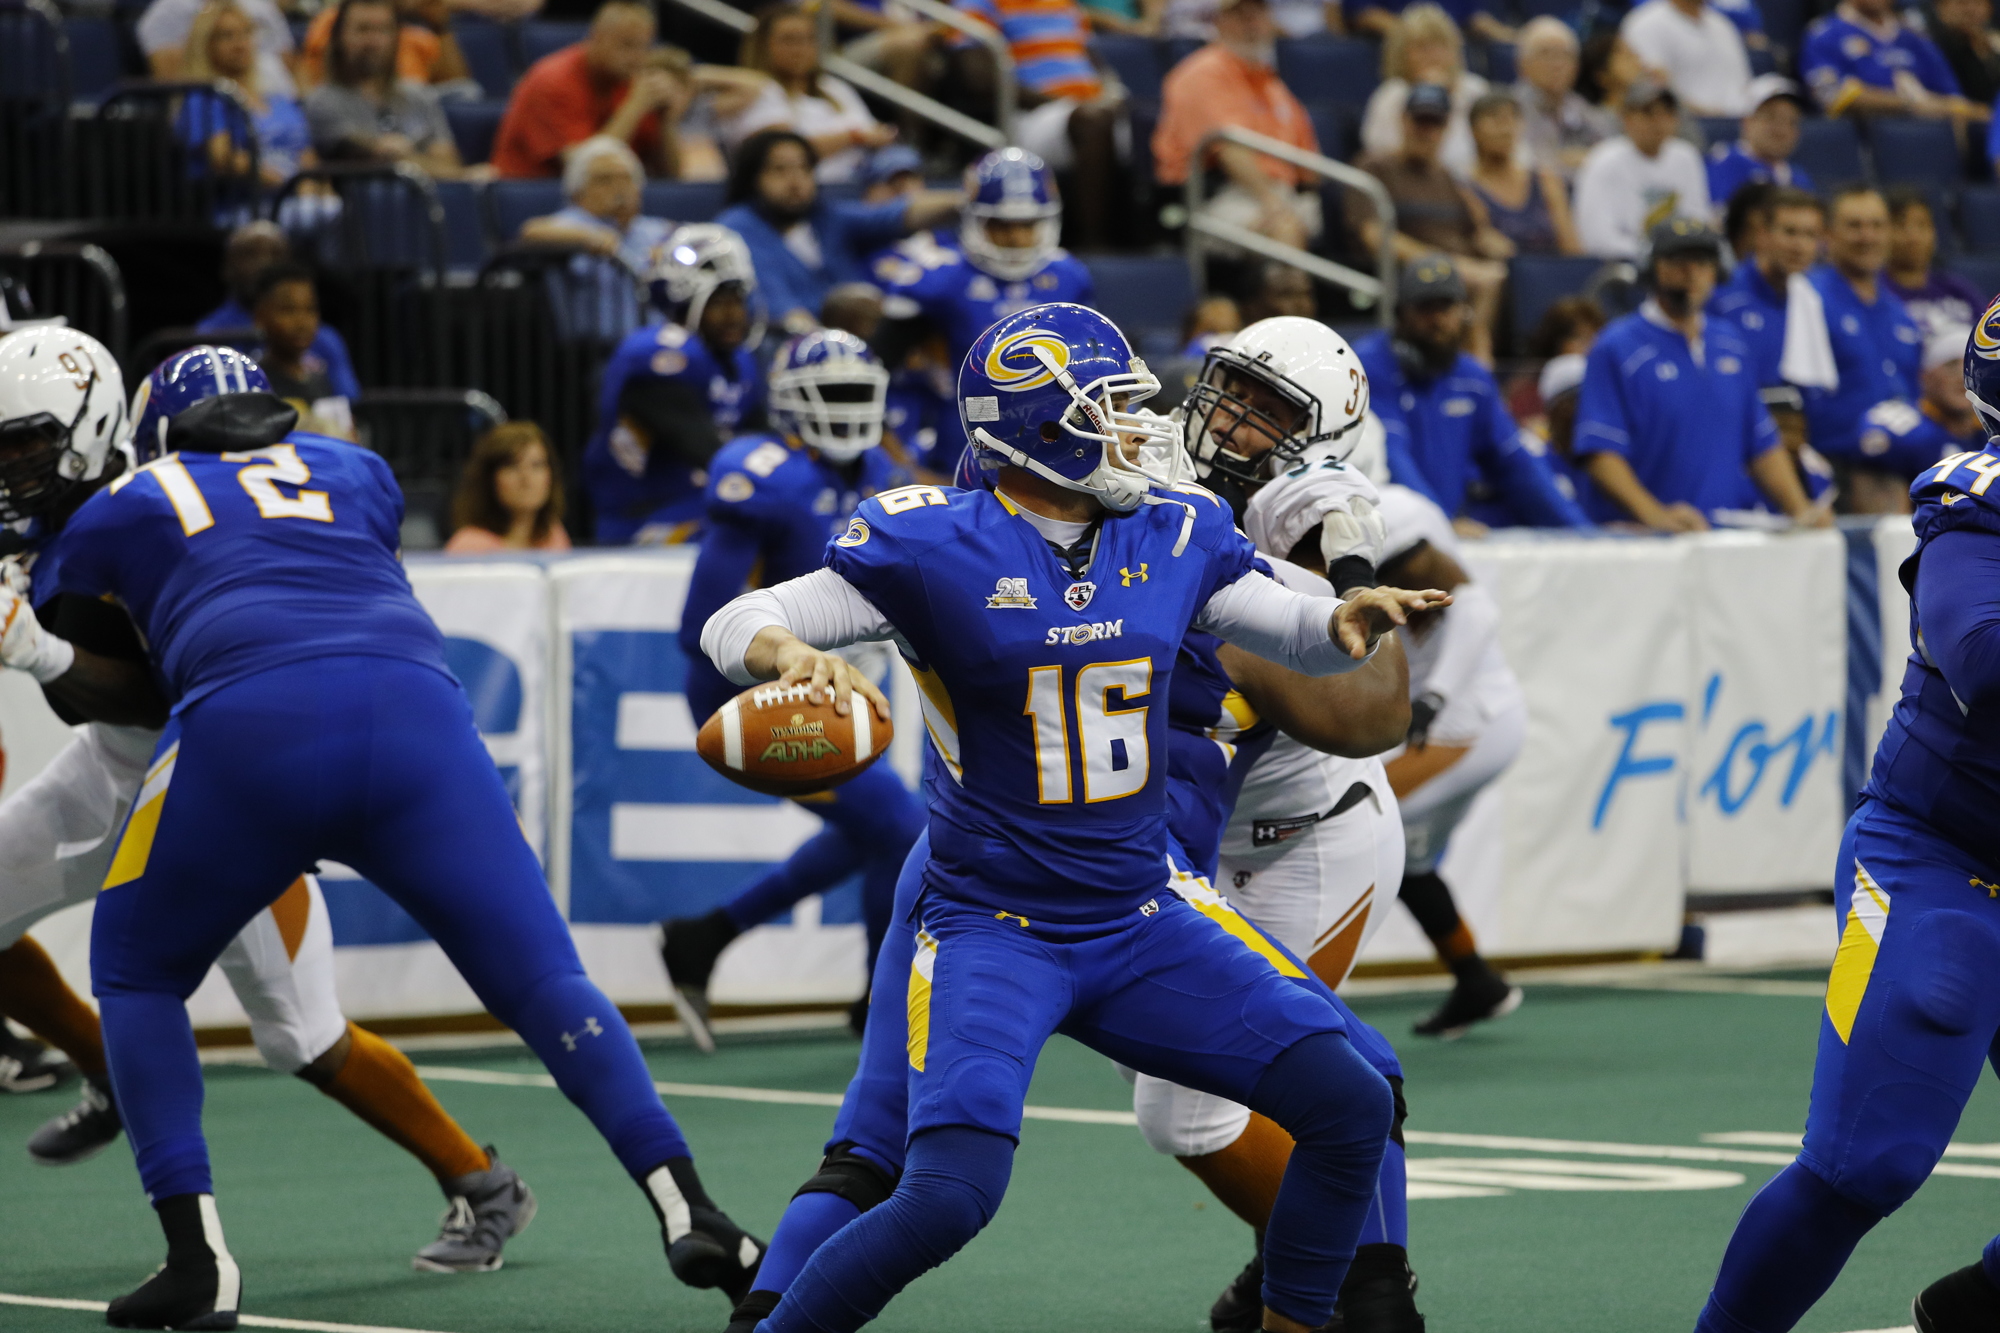 Jason Boltus is in his second season as the quarterback for the Tampa Bay Storm of the Arena Football League. Photo courtesy of Scott Audette / Tampa Bay Storm.